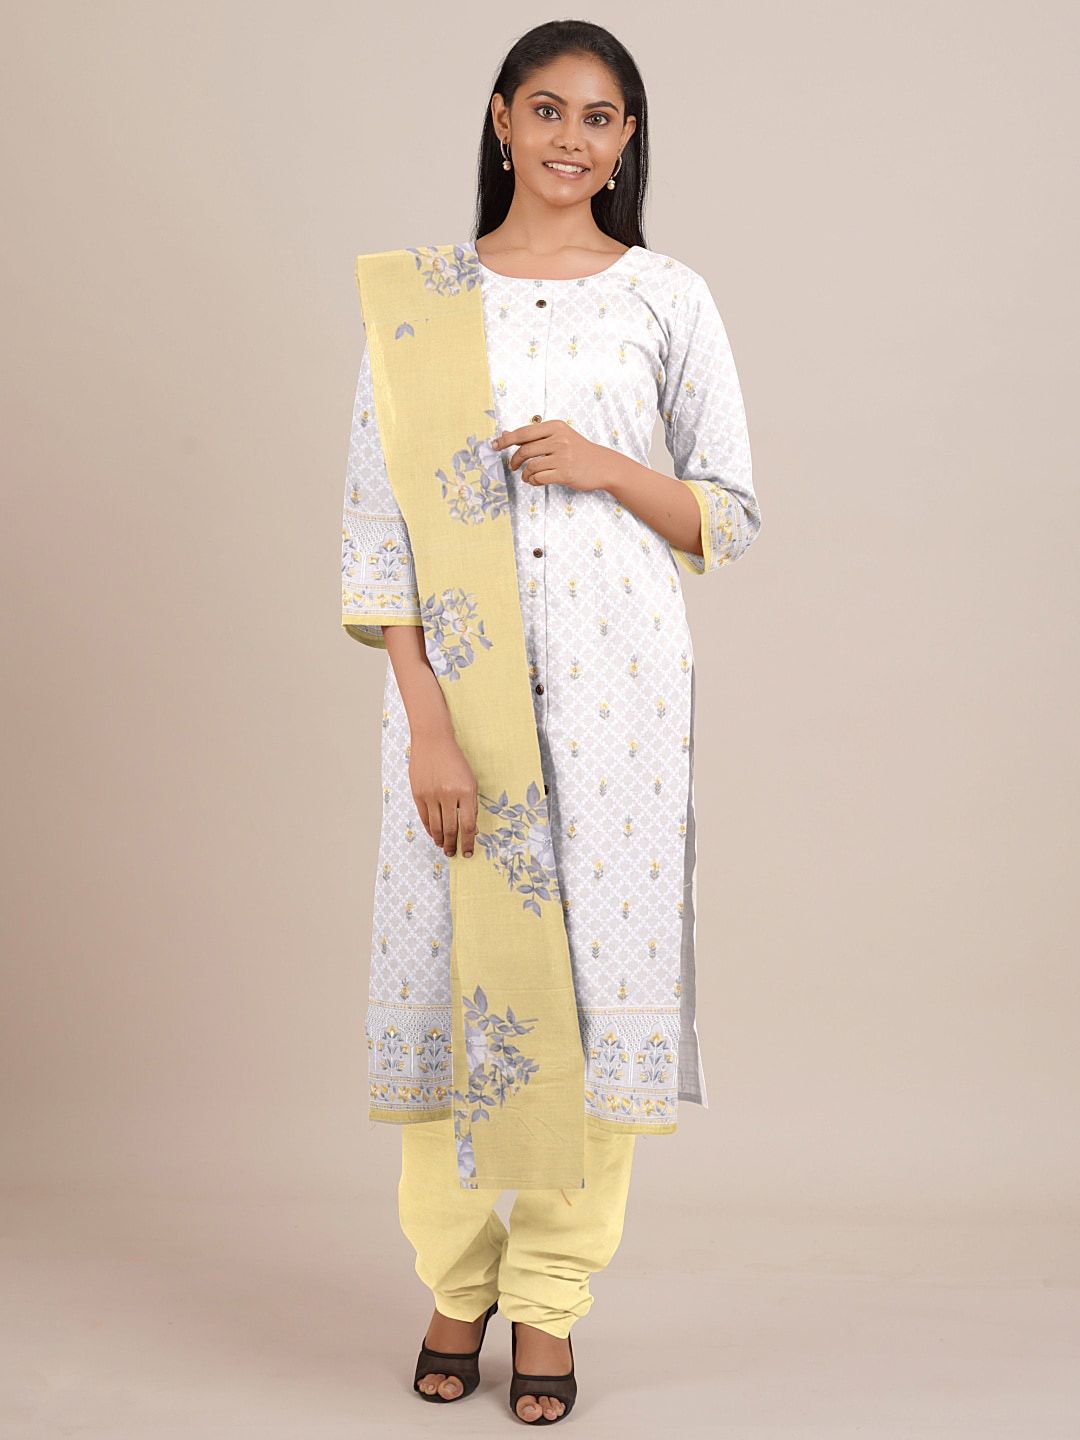 Pothys White & Yellow Printed Unstitched Dress Material Price in India